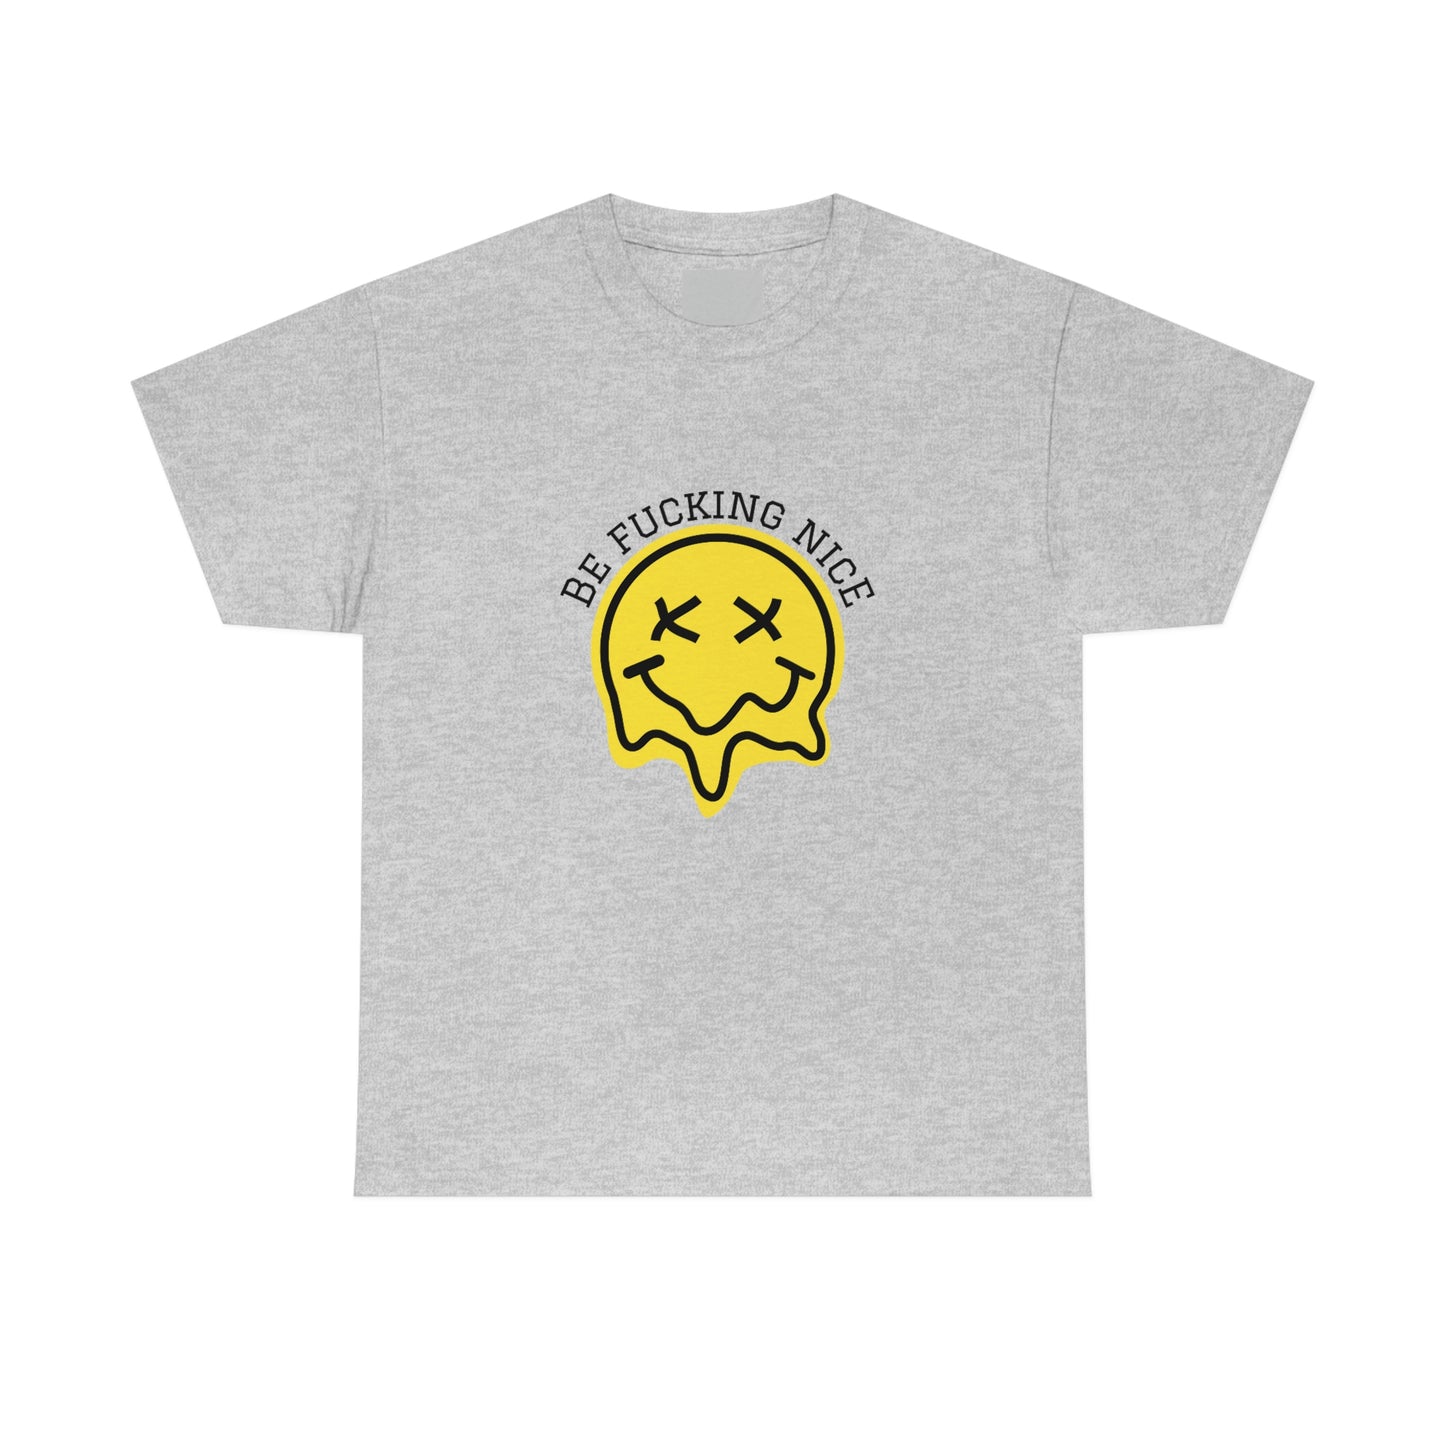 "Be fucking nice. We're all doing our best", Tee